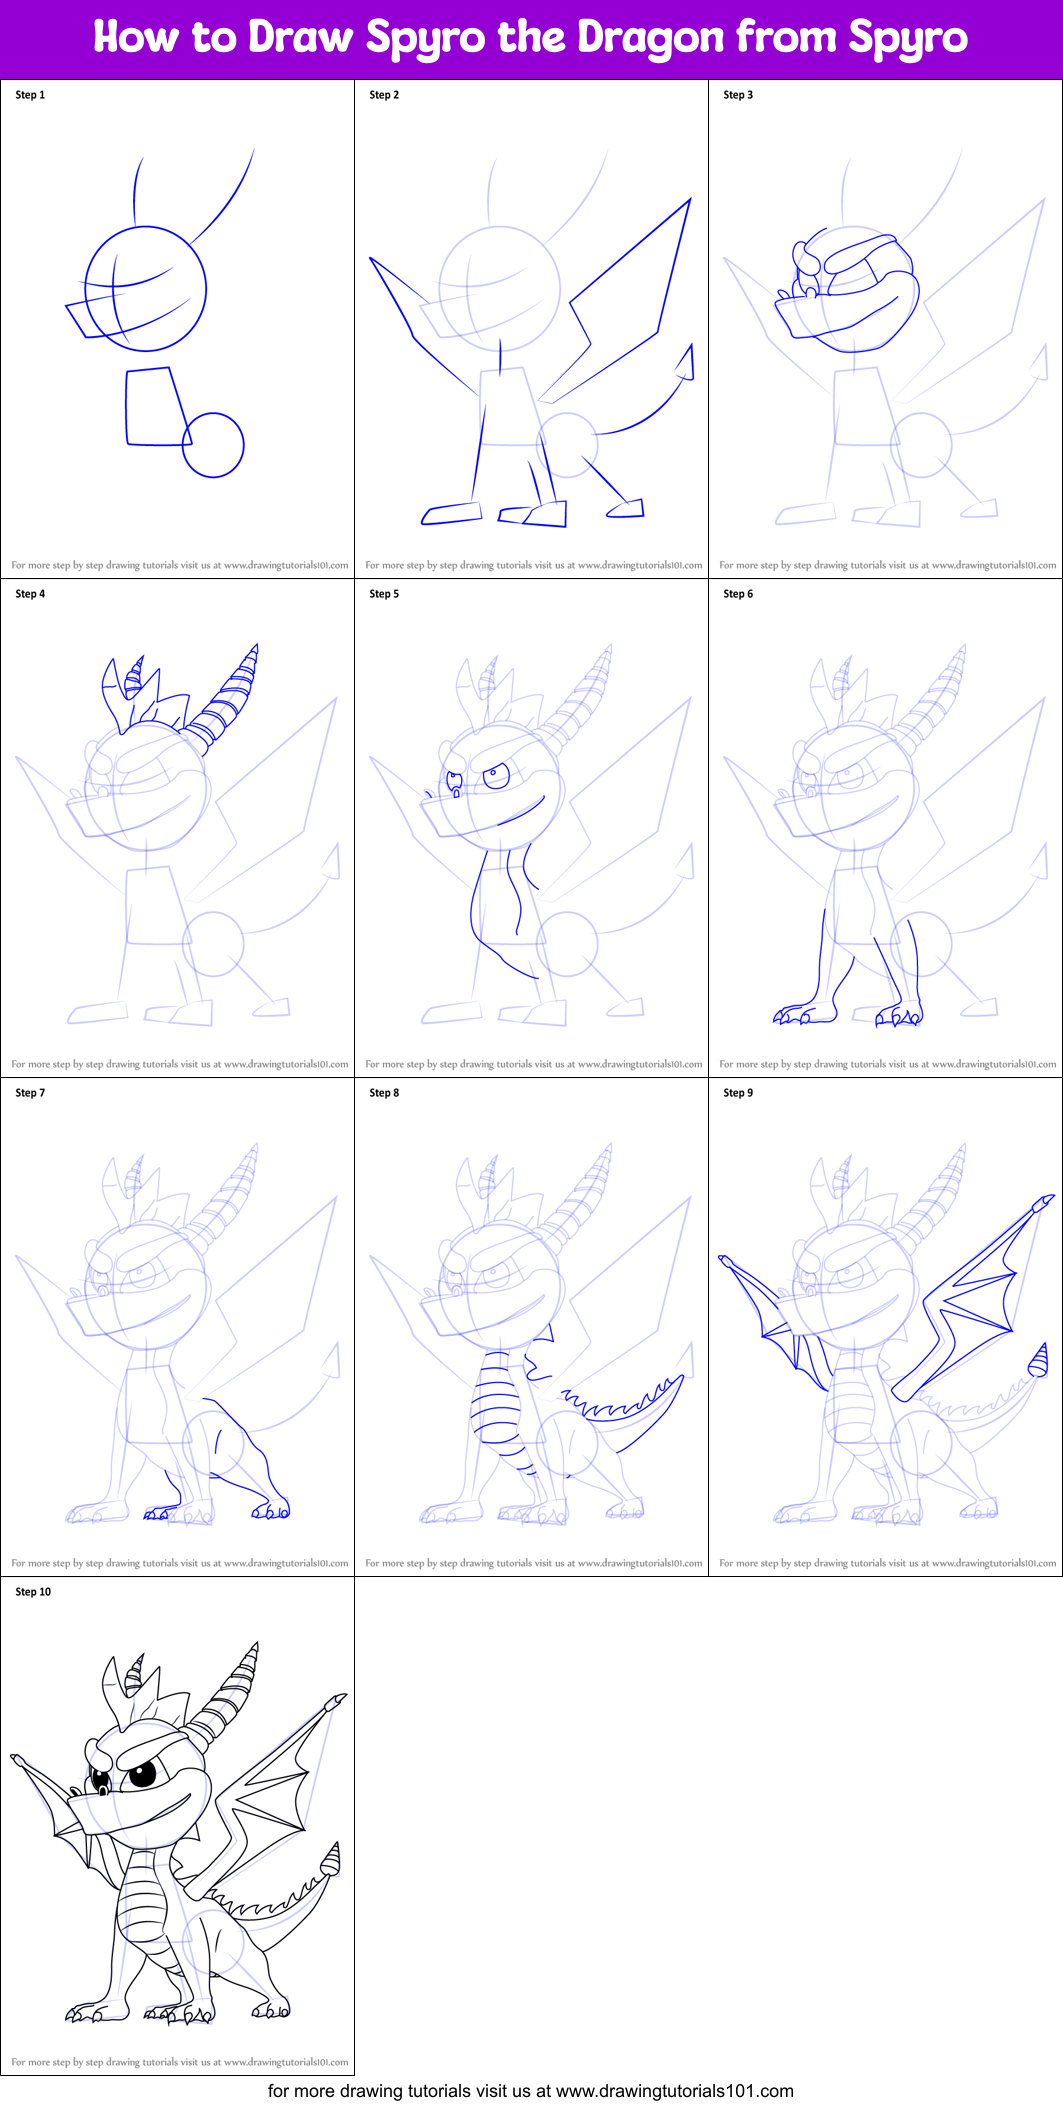 How to Draw Spyro the Dragon from Spyro printable step by step drawing